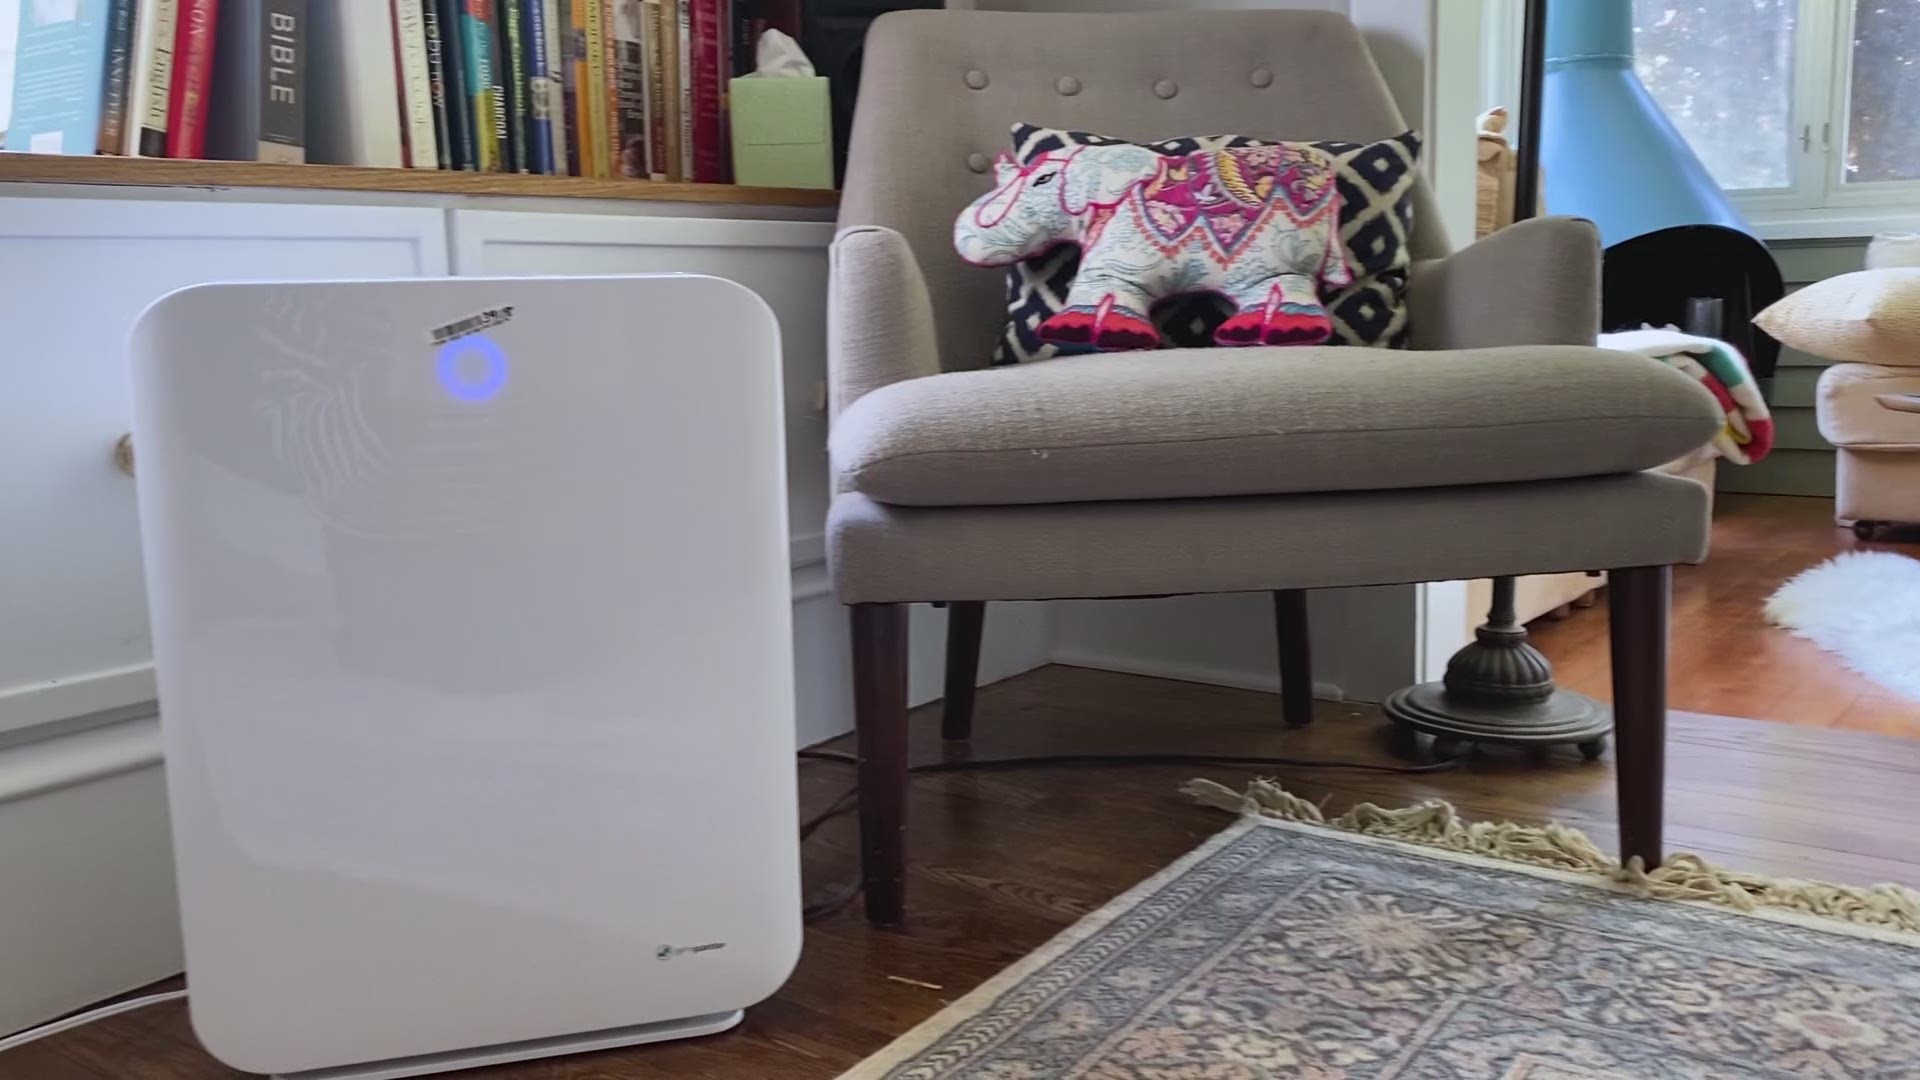 Consumer Reports’ experts reveal what a residential air purifier can really do when it comes to cleaning the air.